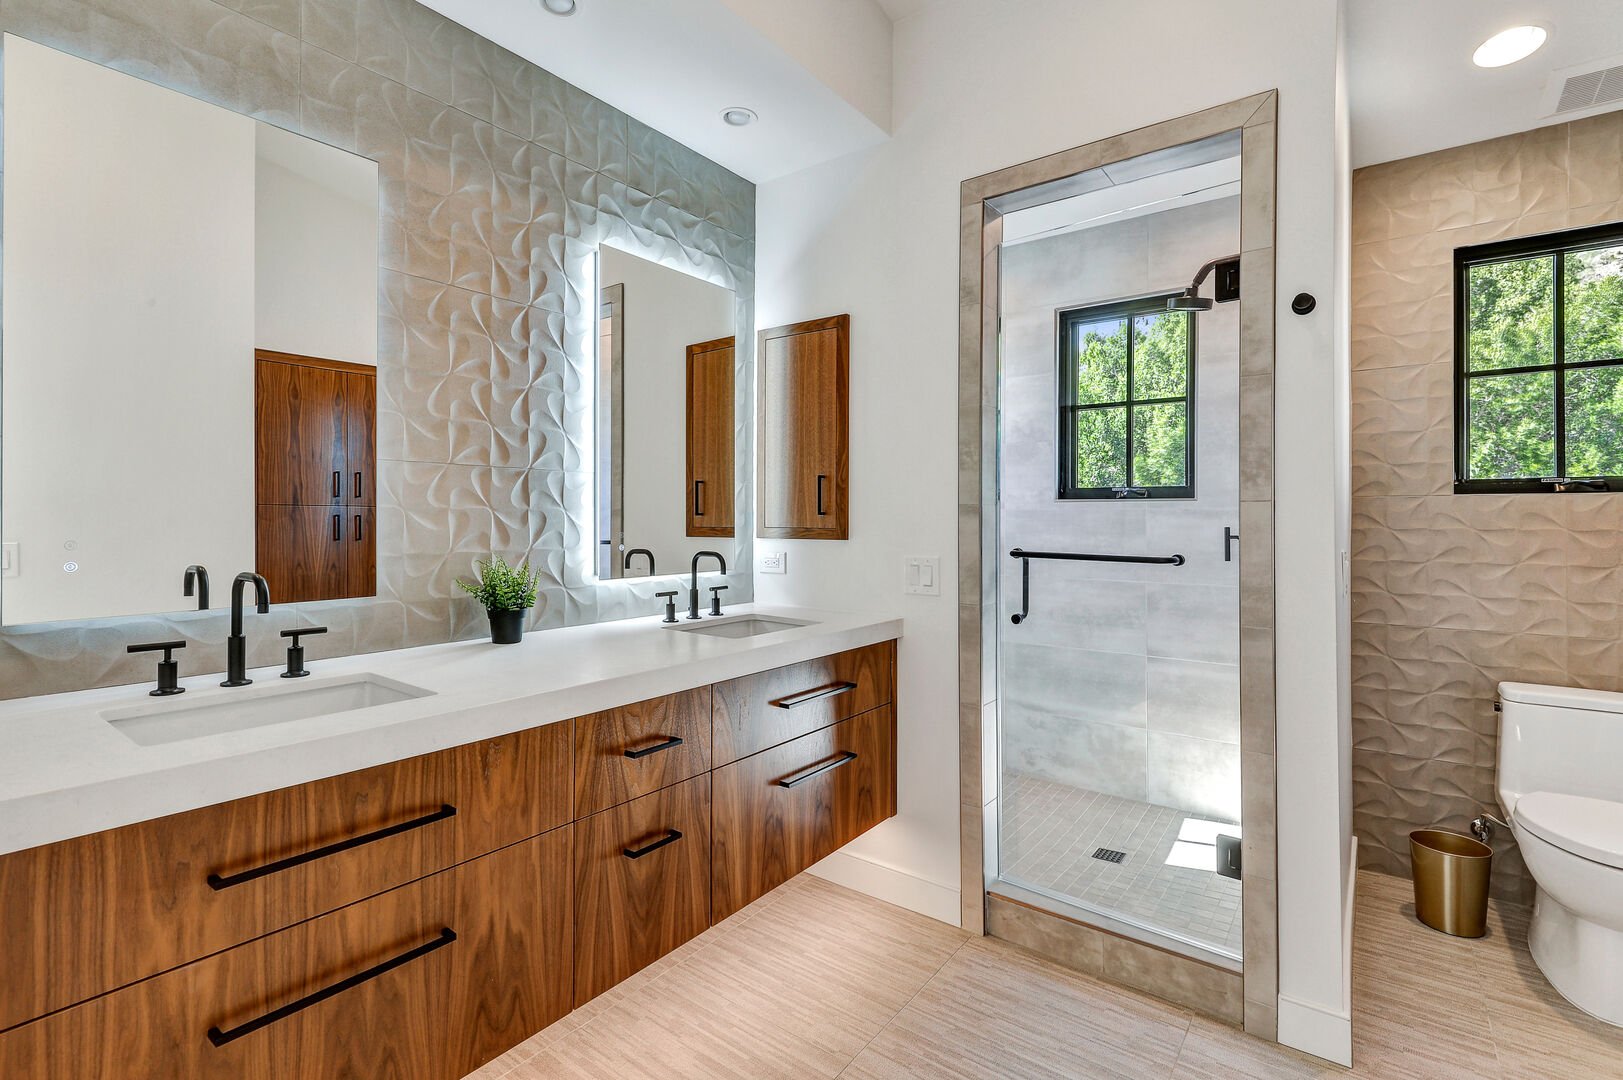 The en suite bathroom of the upstairs Bedroom 2 offers a well-appointed and private space, combining modern amenities with comfort for a luxurious experience.